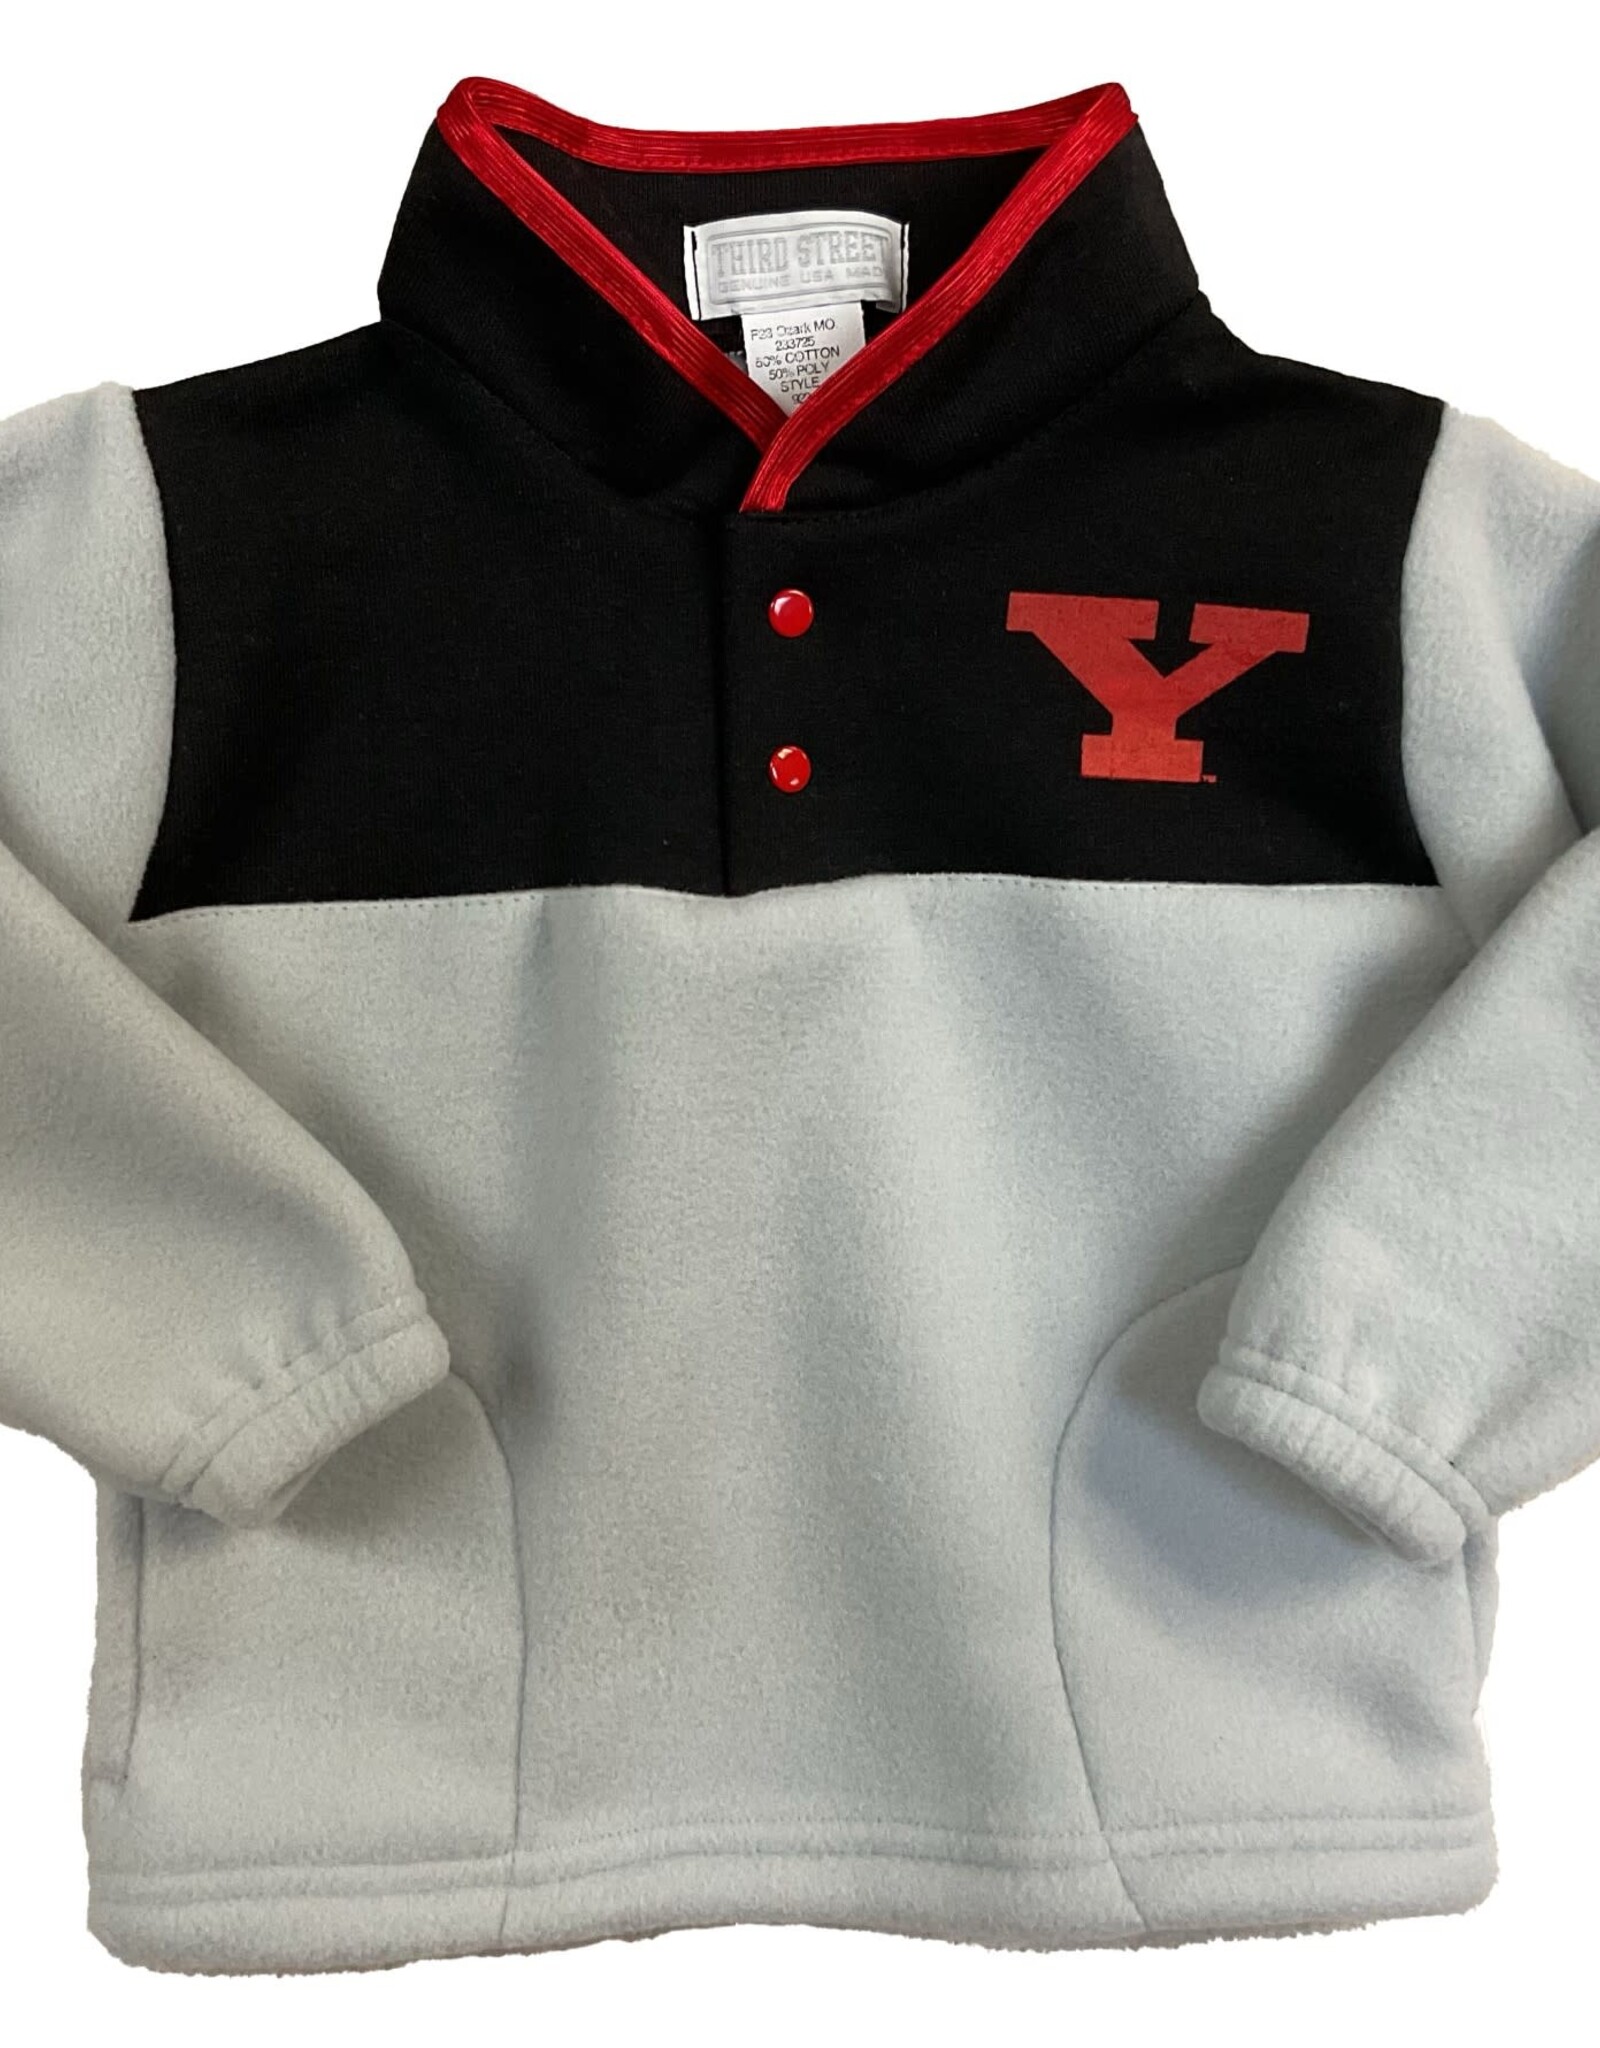 THIRD STREET SPORTSWEAR Youngstown State Penguins Toddler Snap Polar Pullover